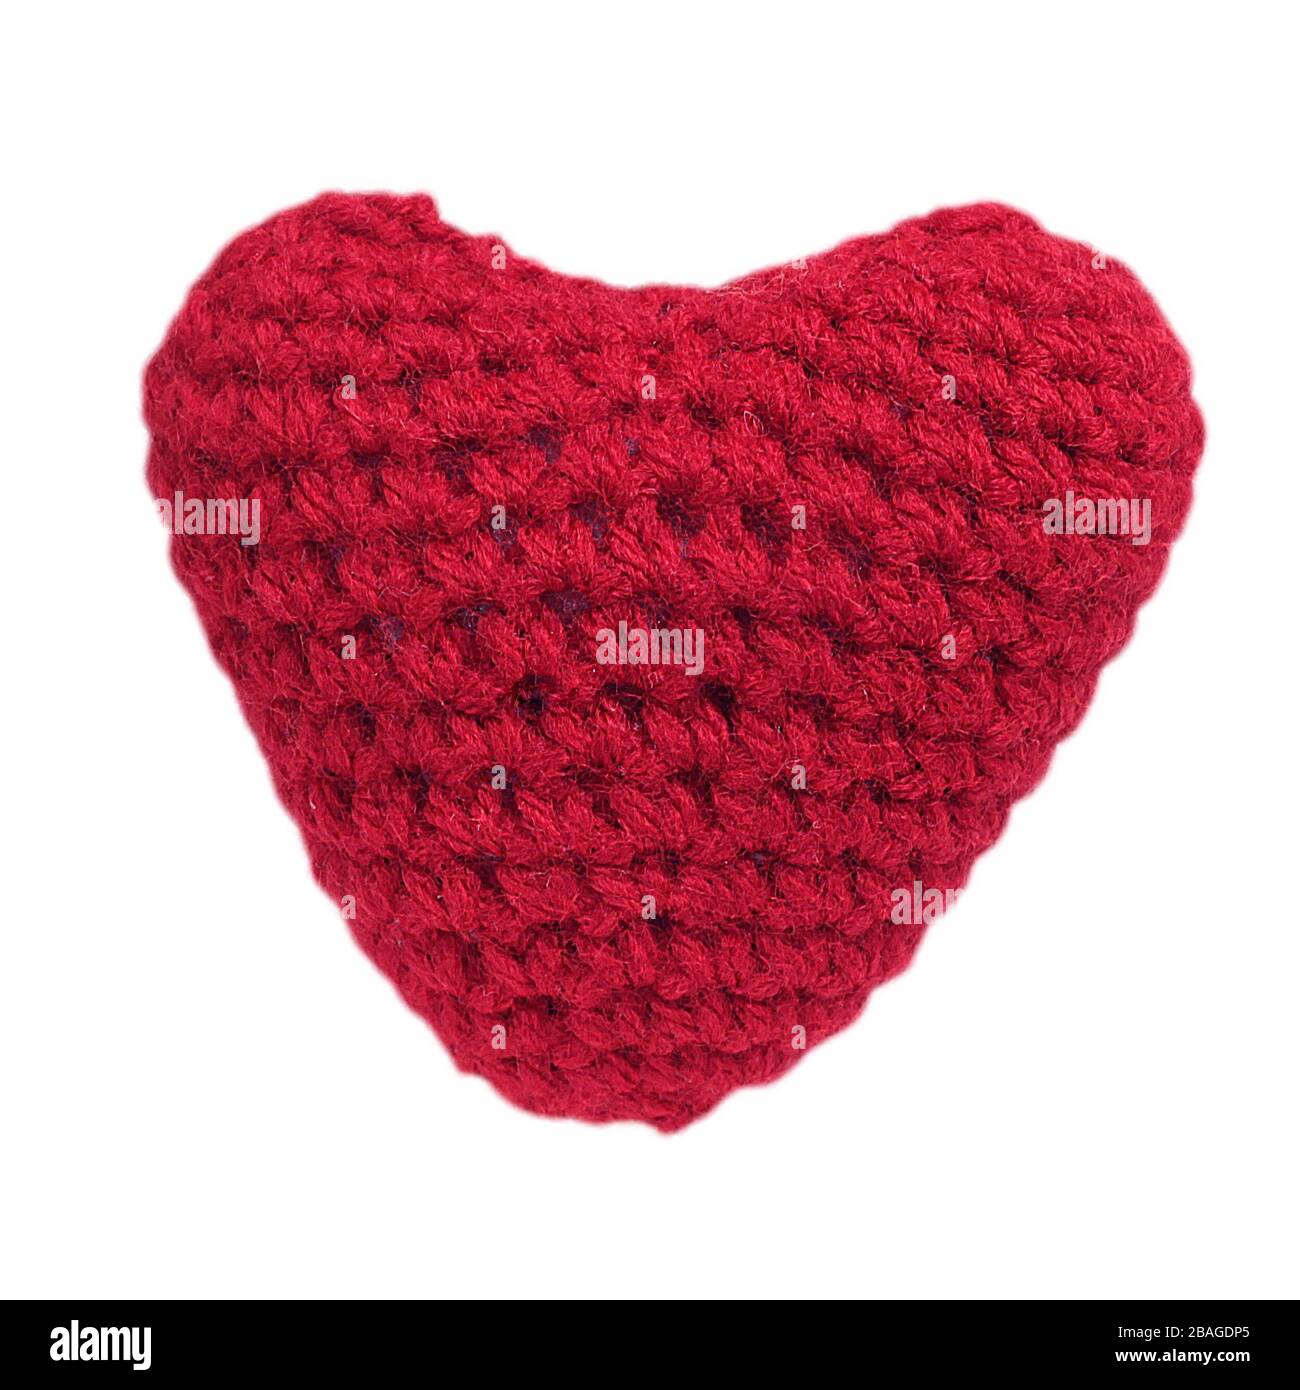 Crochet heart Cut Out Stock Images & Pictures - Alamy